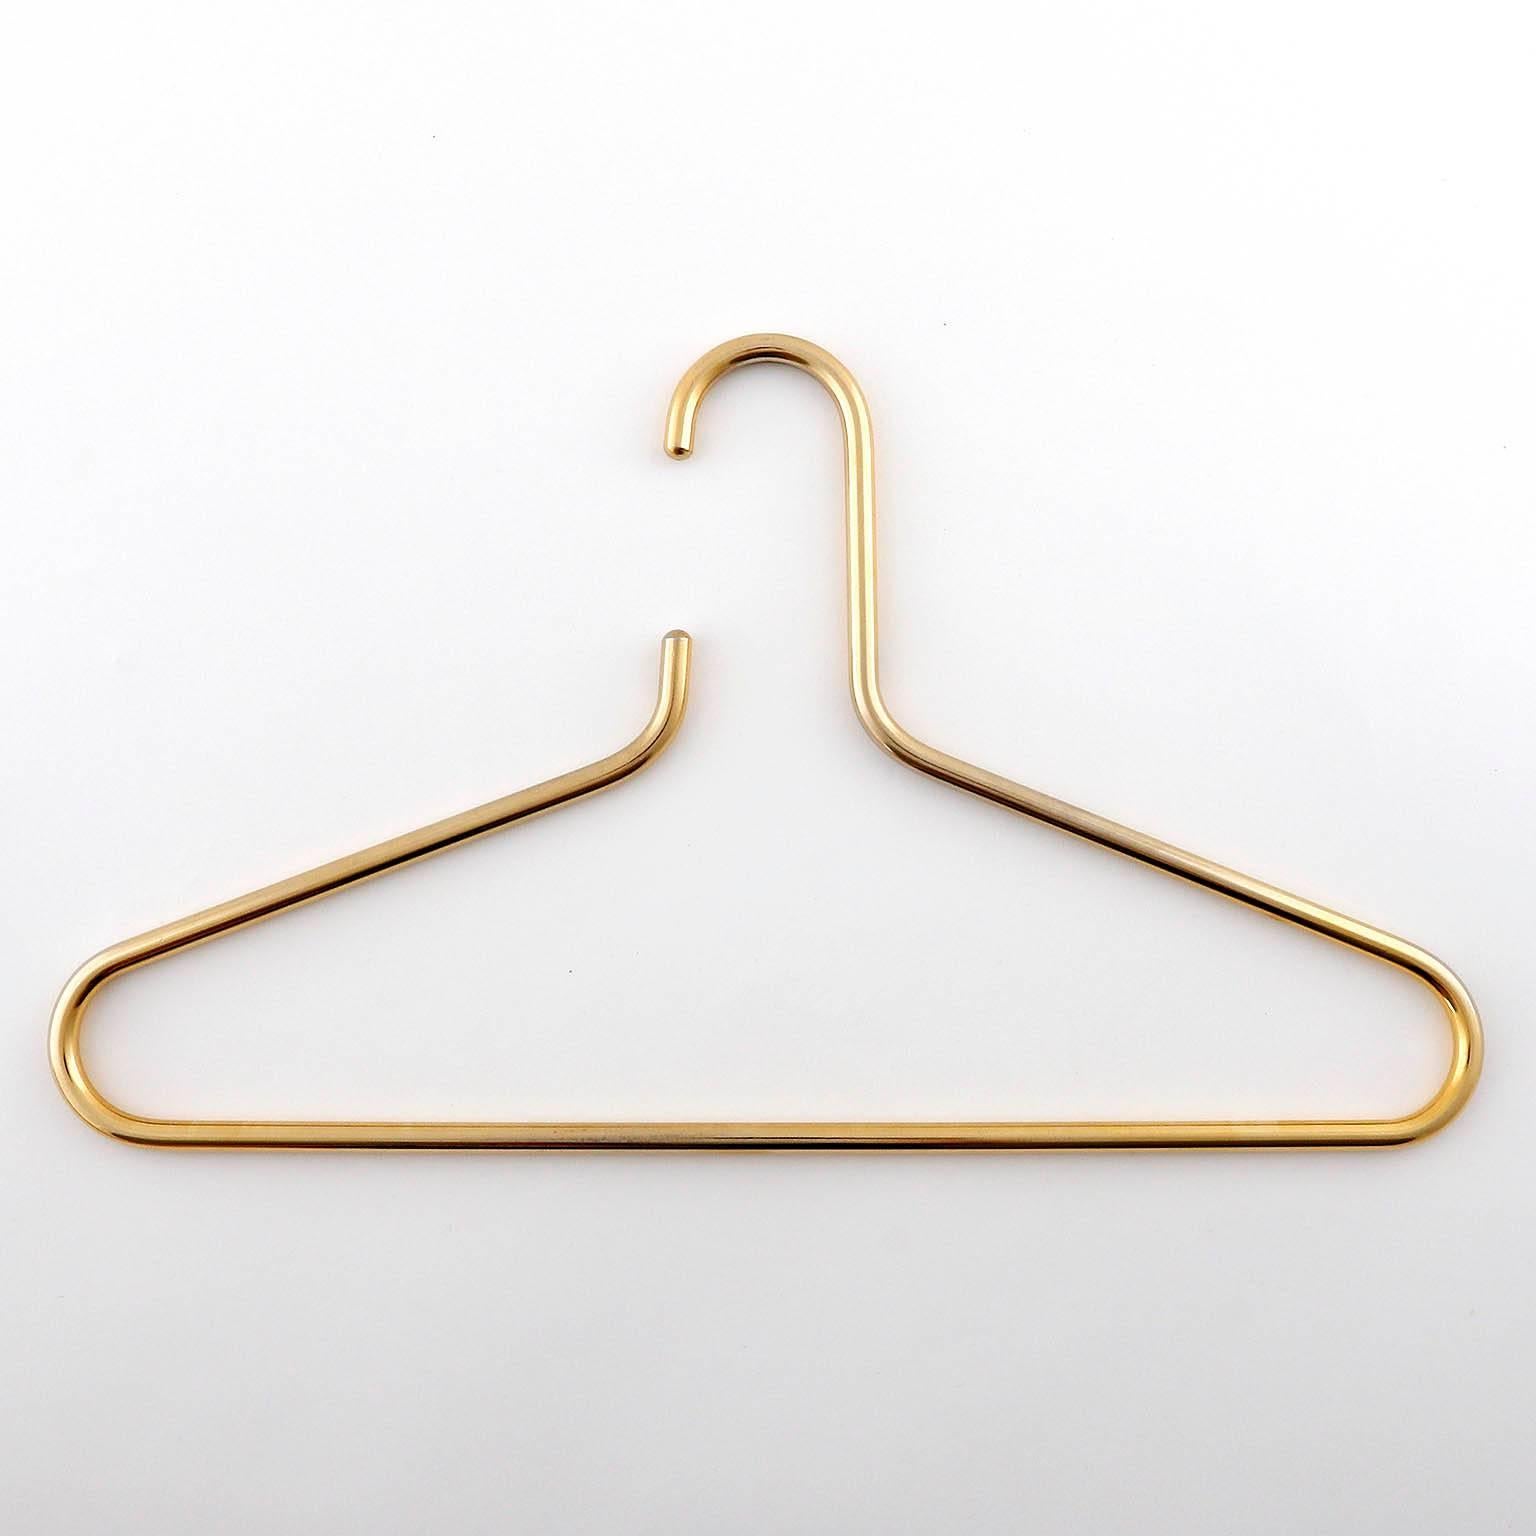 A set of six coat hangers by Carl Auböck, Austria, Vienna, manufactured in Mid-Century, circa 1970 (1960s-1970s). 

A simple and timeless design. Very solid craftsmanship.

Carl Aubock / Auboeck.